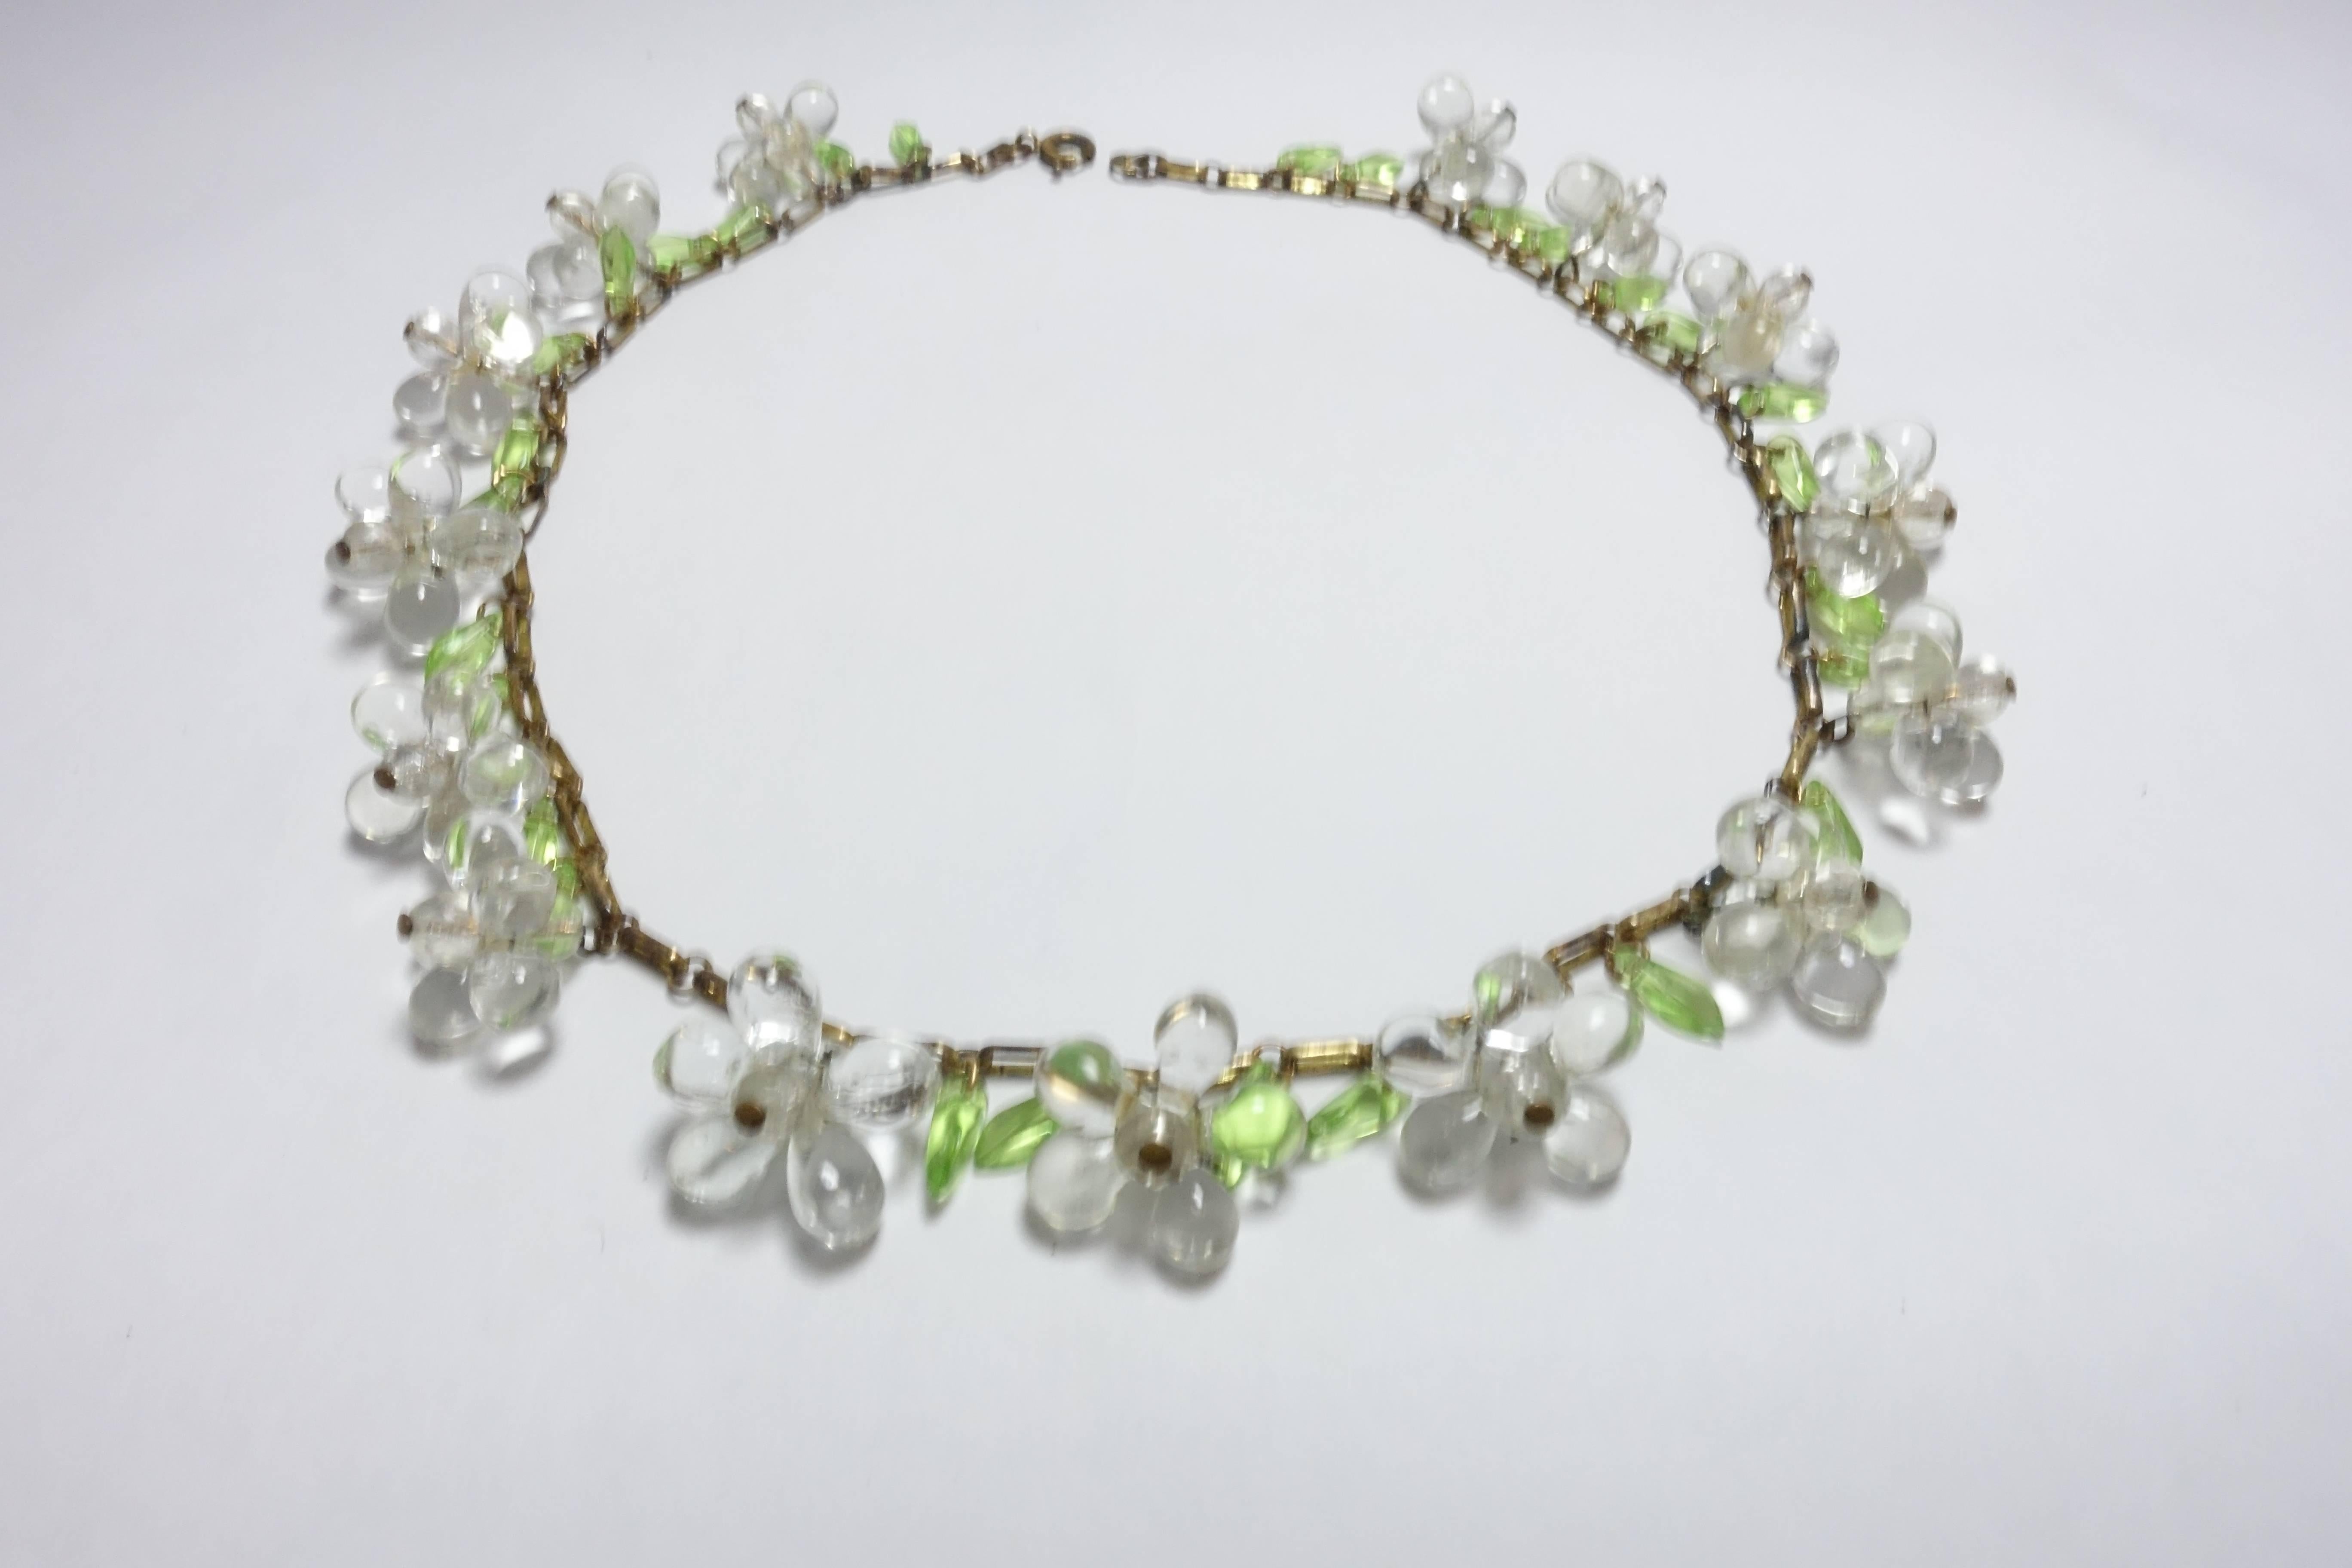 Some people may recognize this necklace as an early Haskell before she signed her jewelry.  It is so beautiful to the eye and to think it survived all these years.  Thank goodness for a careful collector.  The necklace has 15 clear glass flowers